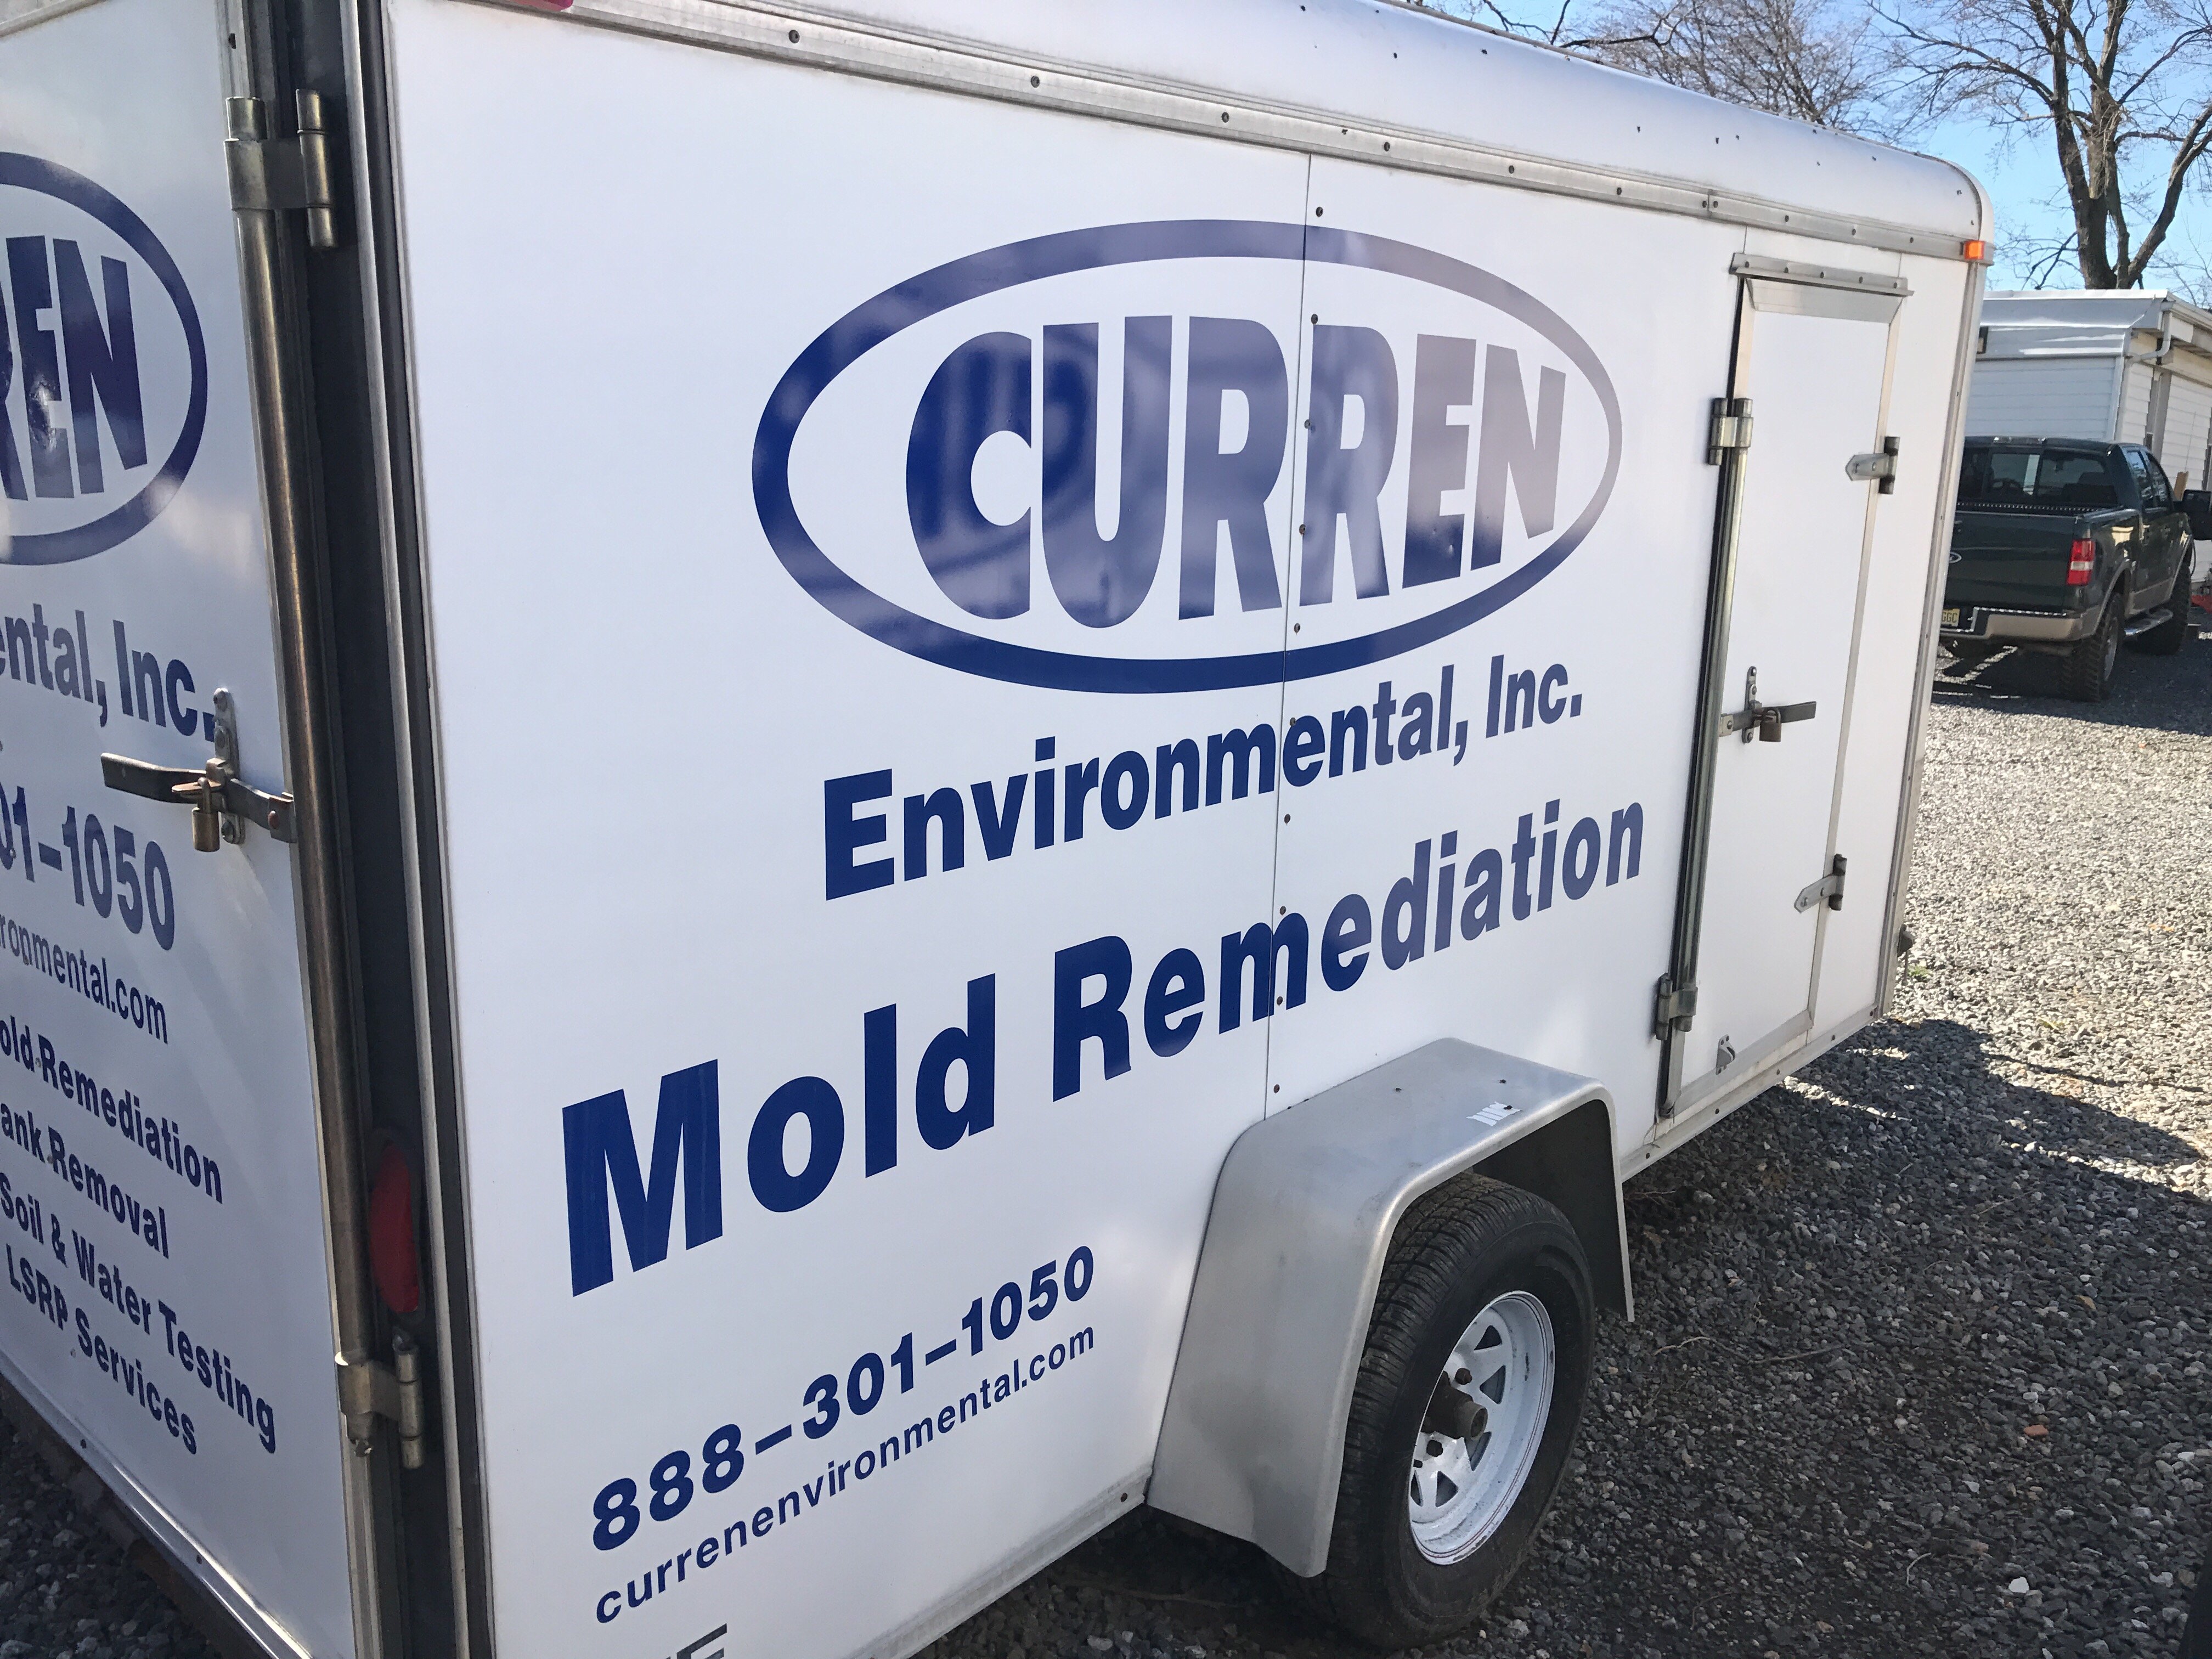 Is It Appropriate For A Mold Remediation Company To Do Their Own Testing?